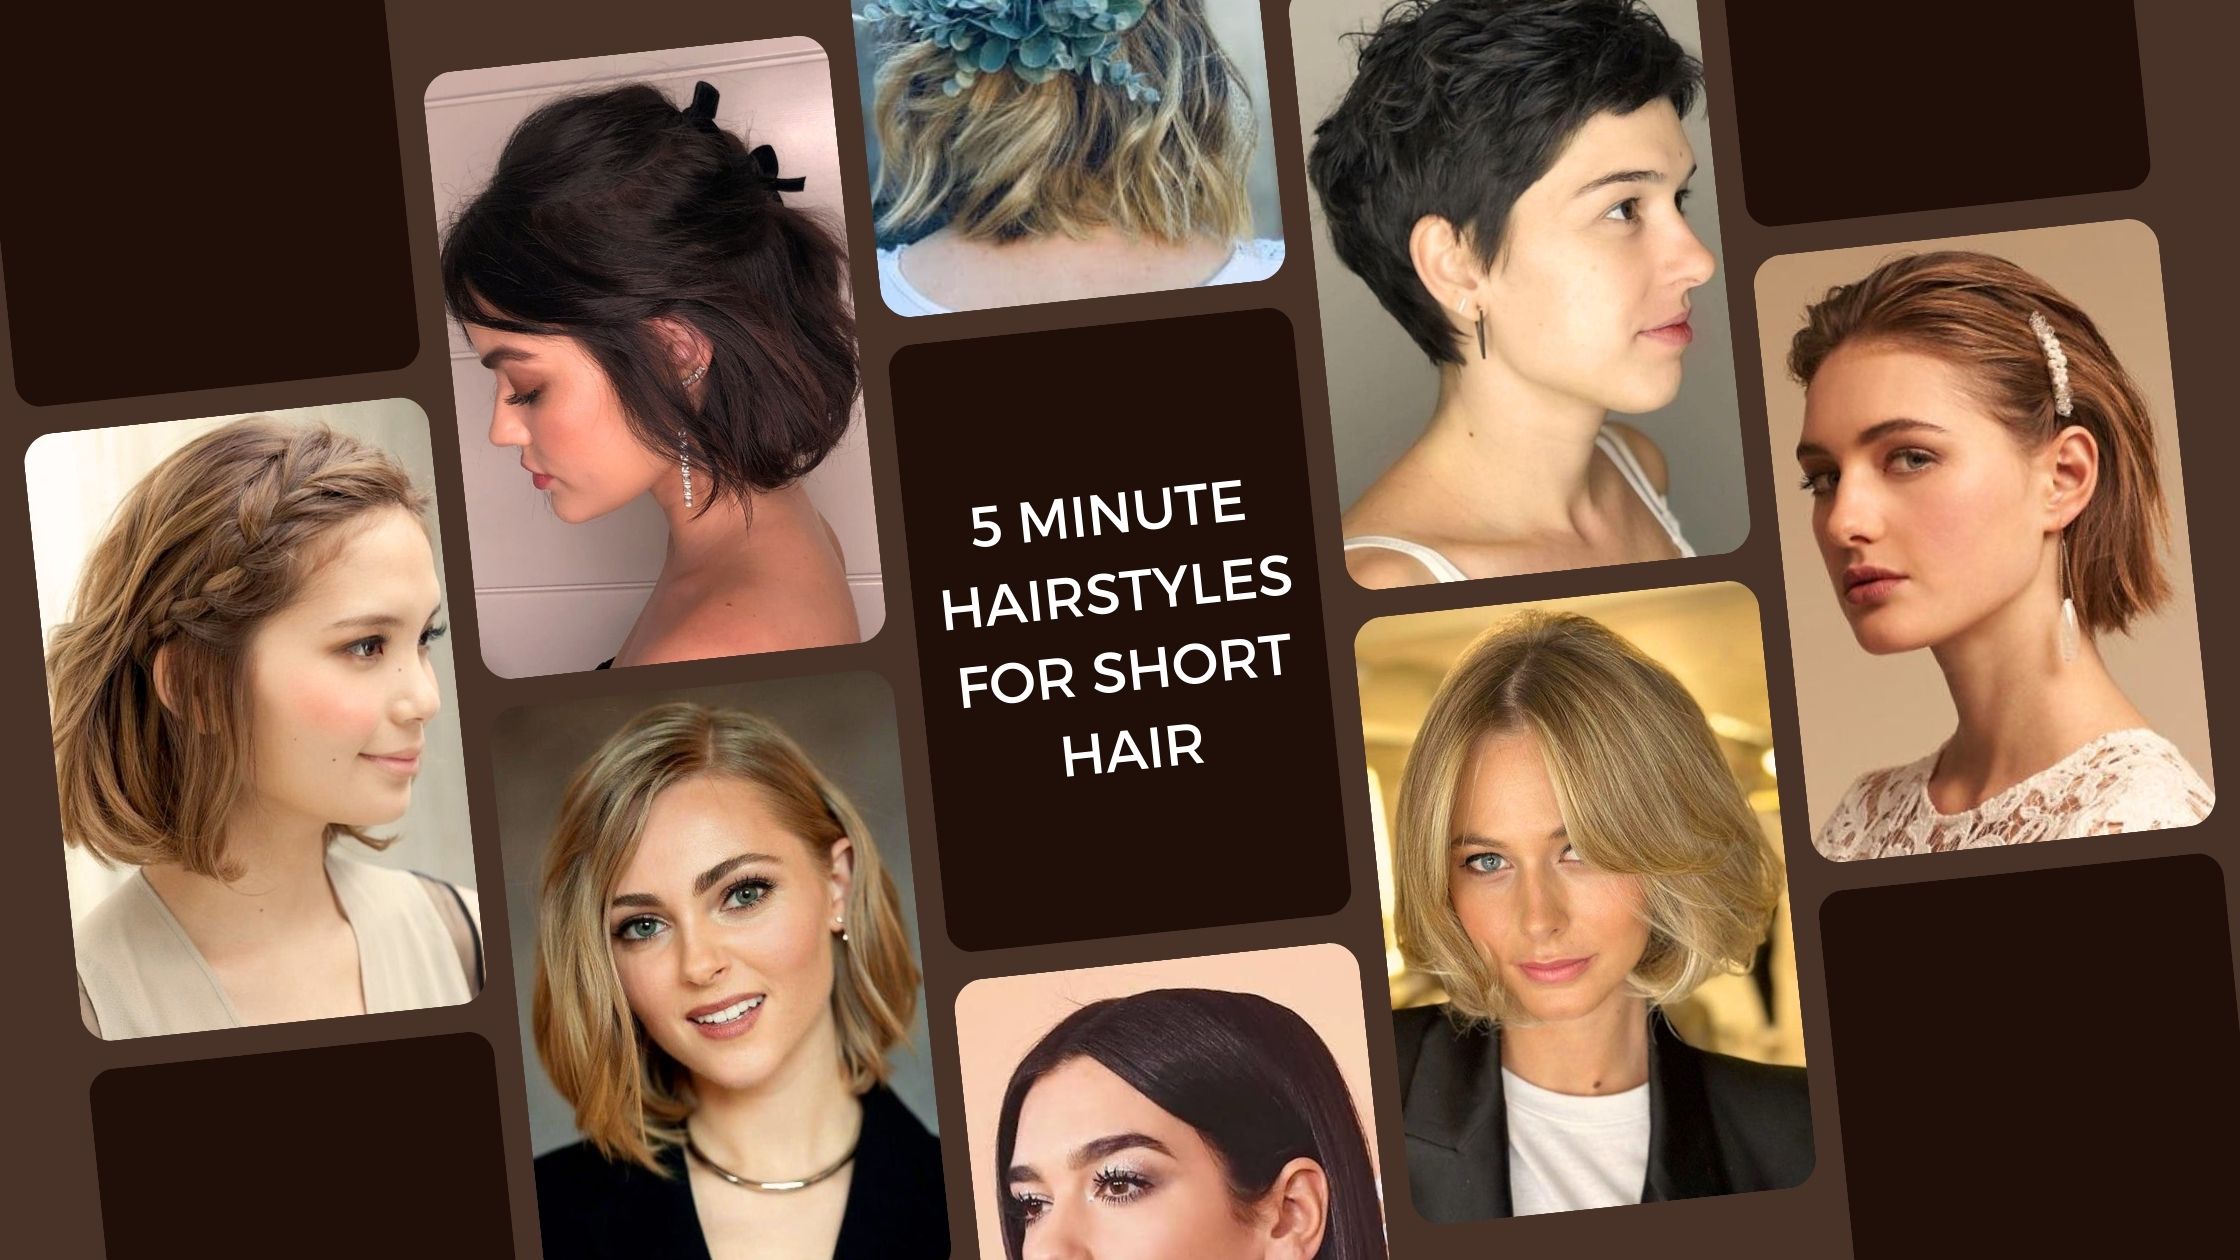 5 Minute Hairstyles for Short Hair